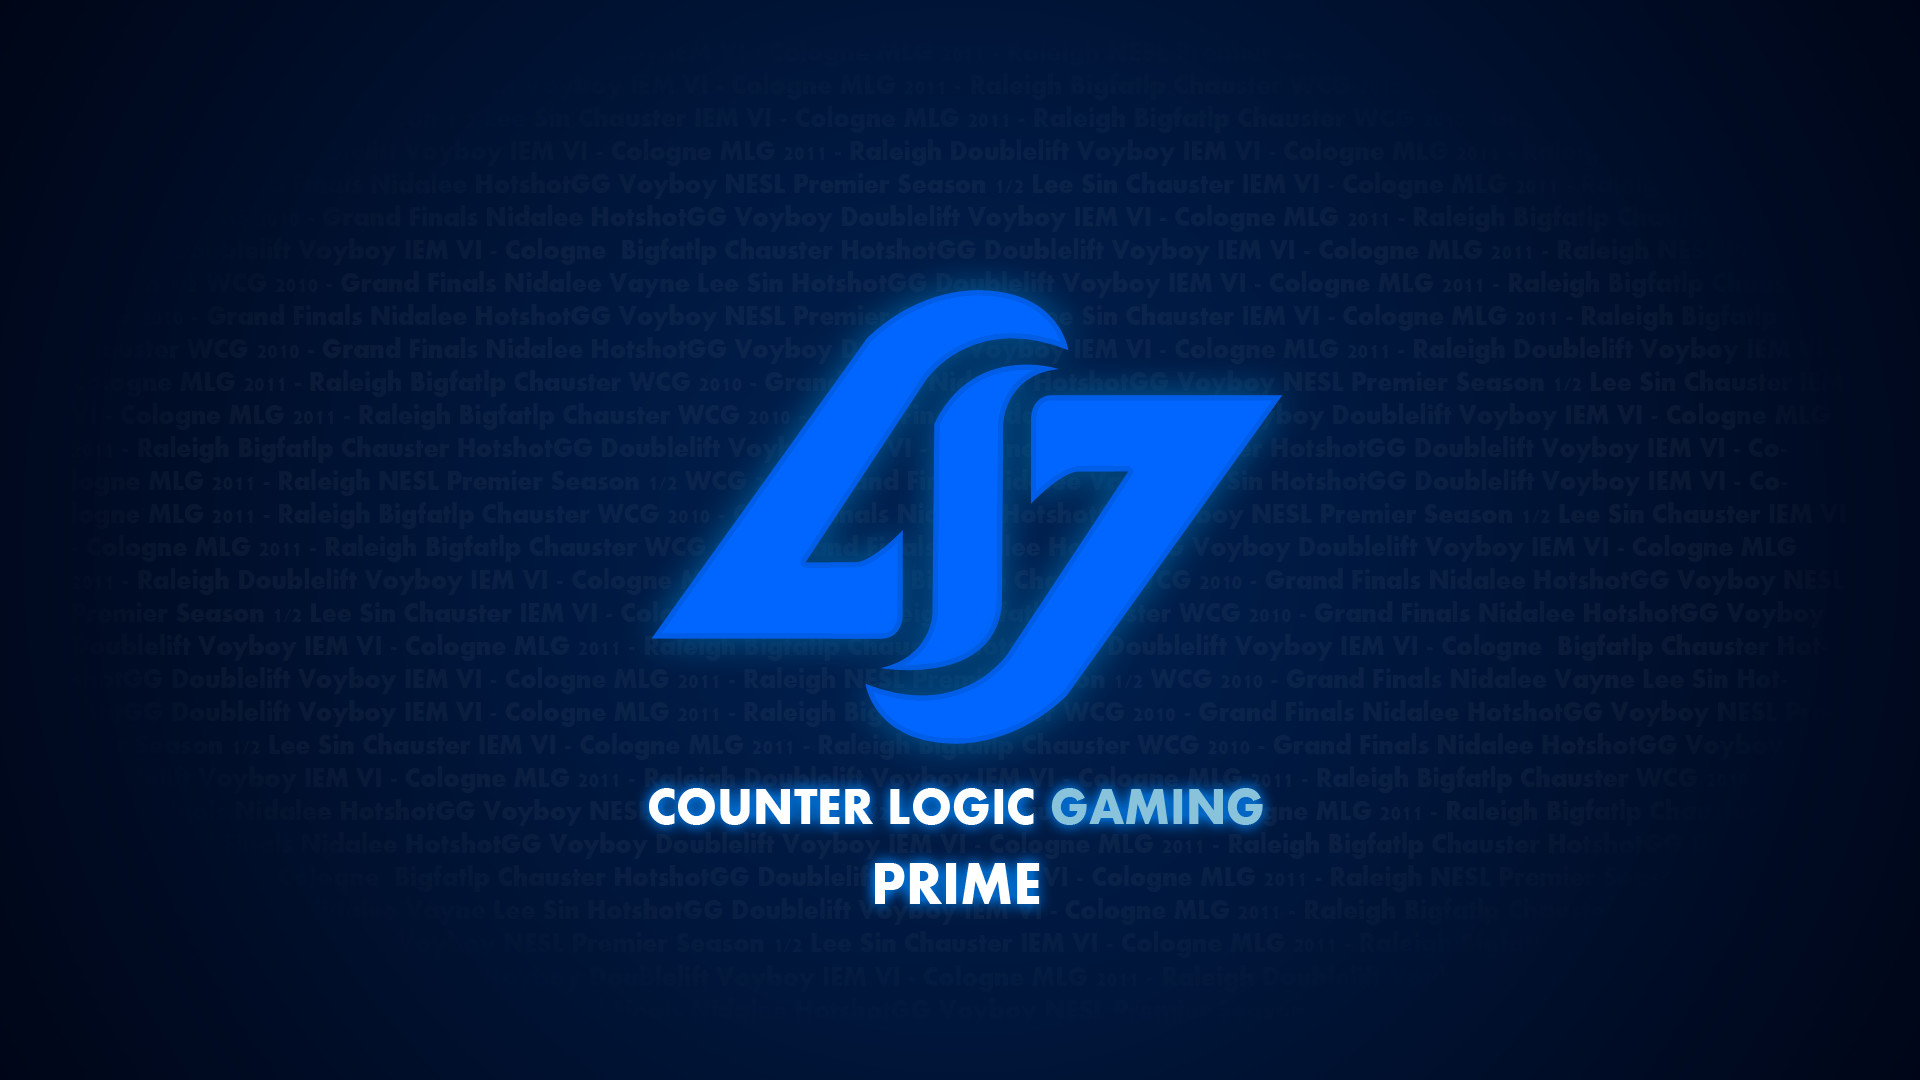 1920x1080 Counter Logic Gaming Prime Wallpaper by ggeorgiev92 Counter Logic Gaming  Prime Wallpaper by ggeorgiev92